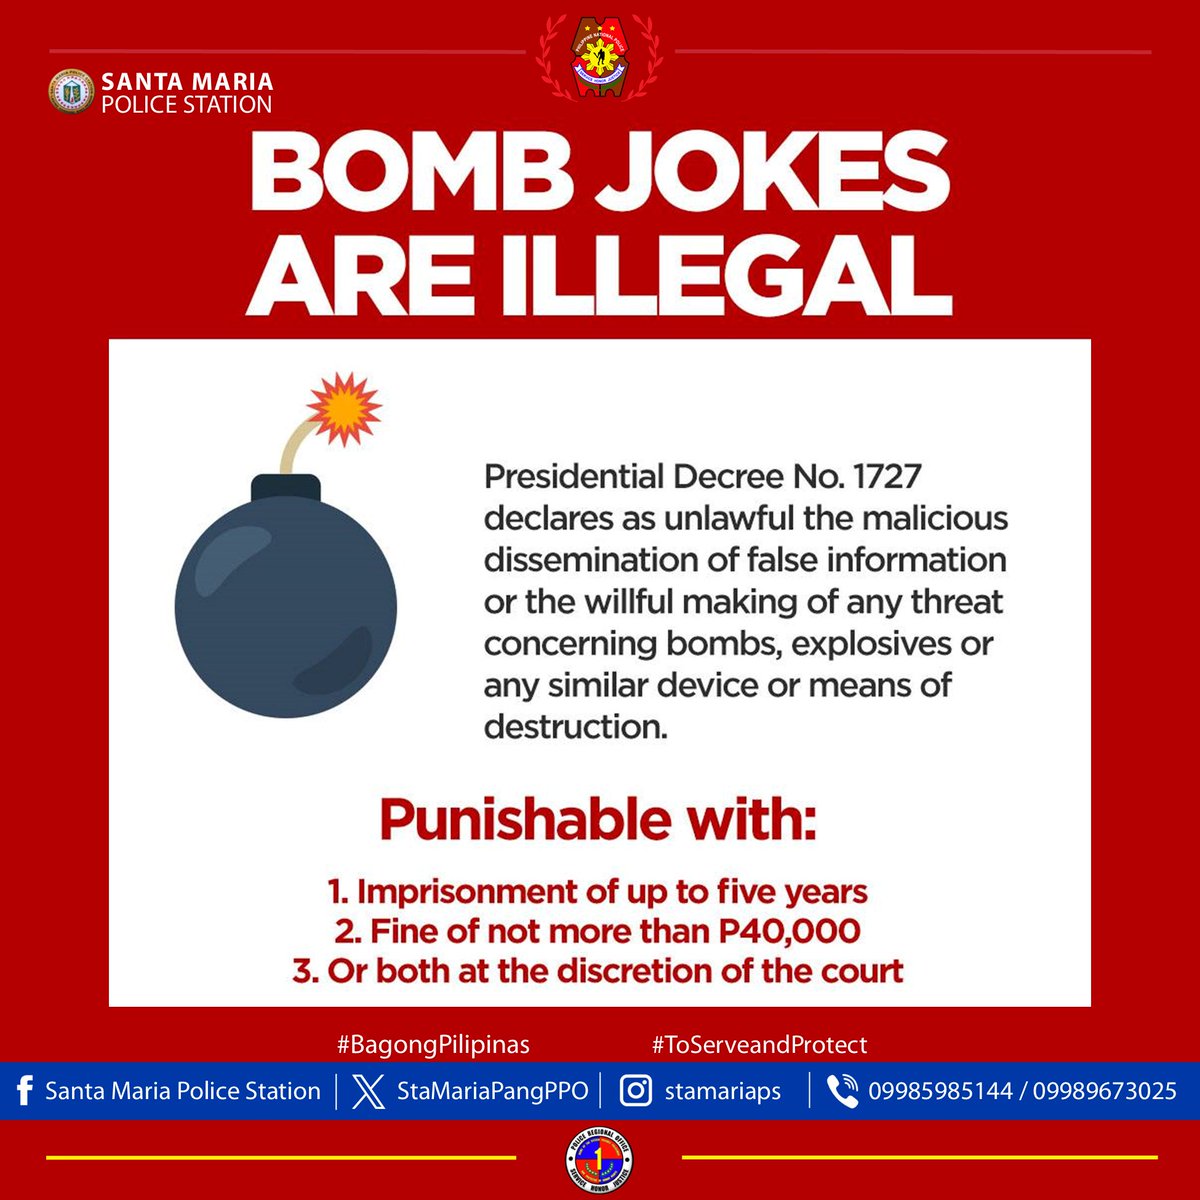 Bomb jokes are illegal and is punishable by law

'𝐒𝐚 𝐁𝐚𝐨𝐧𝐠 𝐏𝐢𝐥𝐢𝐩𝐢𝐧𝐚𝐬, 𝐚𝐧𝐠 𝐆𝐮𝐬𝐭𝐨 𝐧𝐠 𝐏𝐮𝐥𝐢𝐬, 𝐋𝐢𝐠𝐭𝐚𝐬 𝐊𝐚!'
#BagongPilipinas #ToServeandProtect